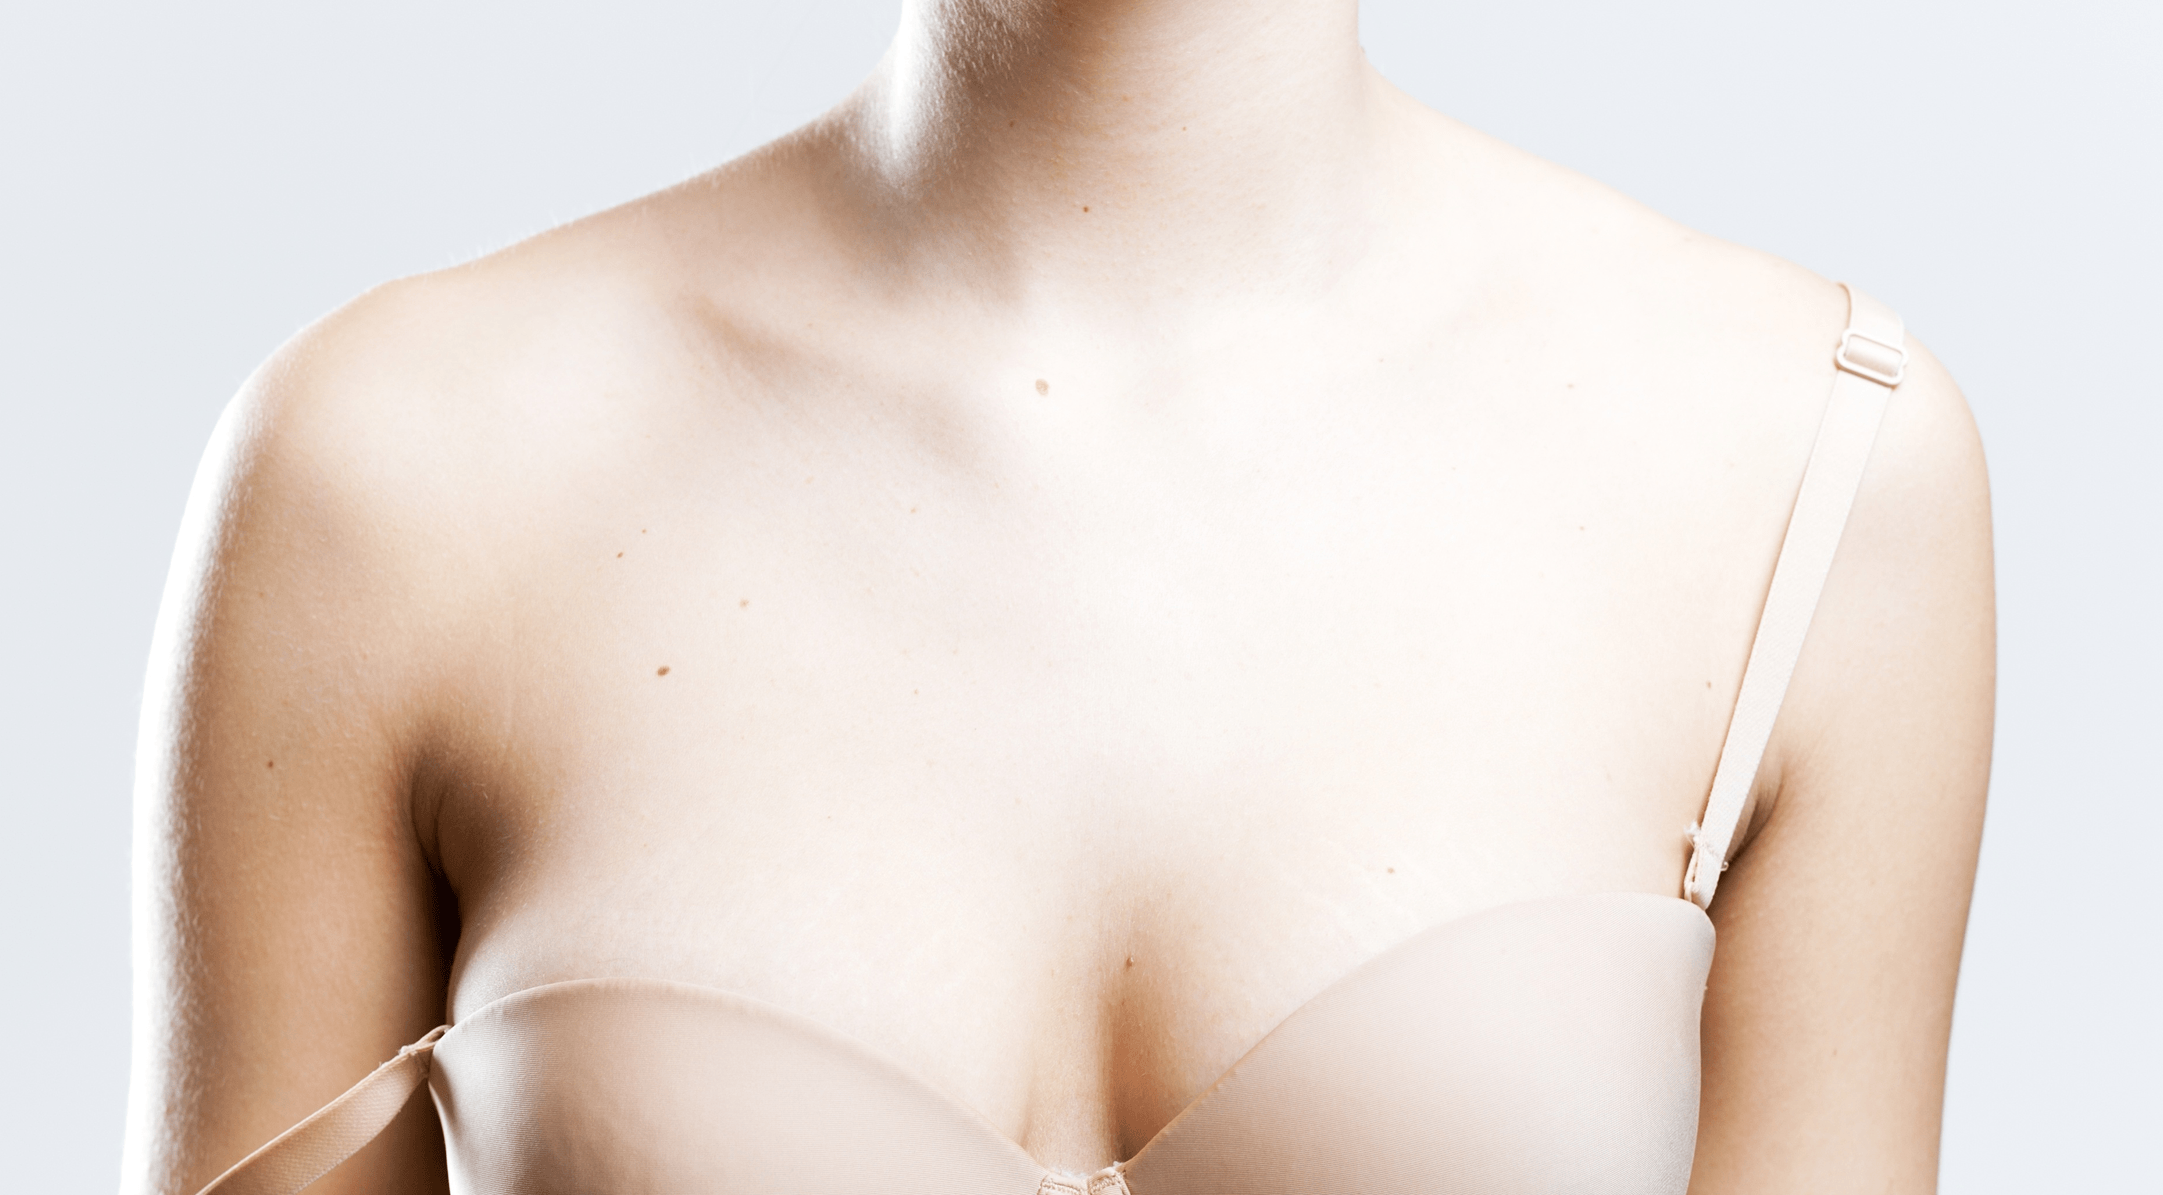 Did you know this fact about bra band sizes? What band size do YOU